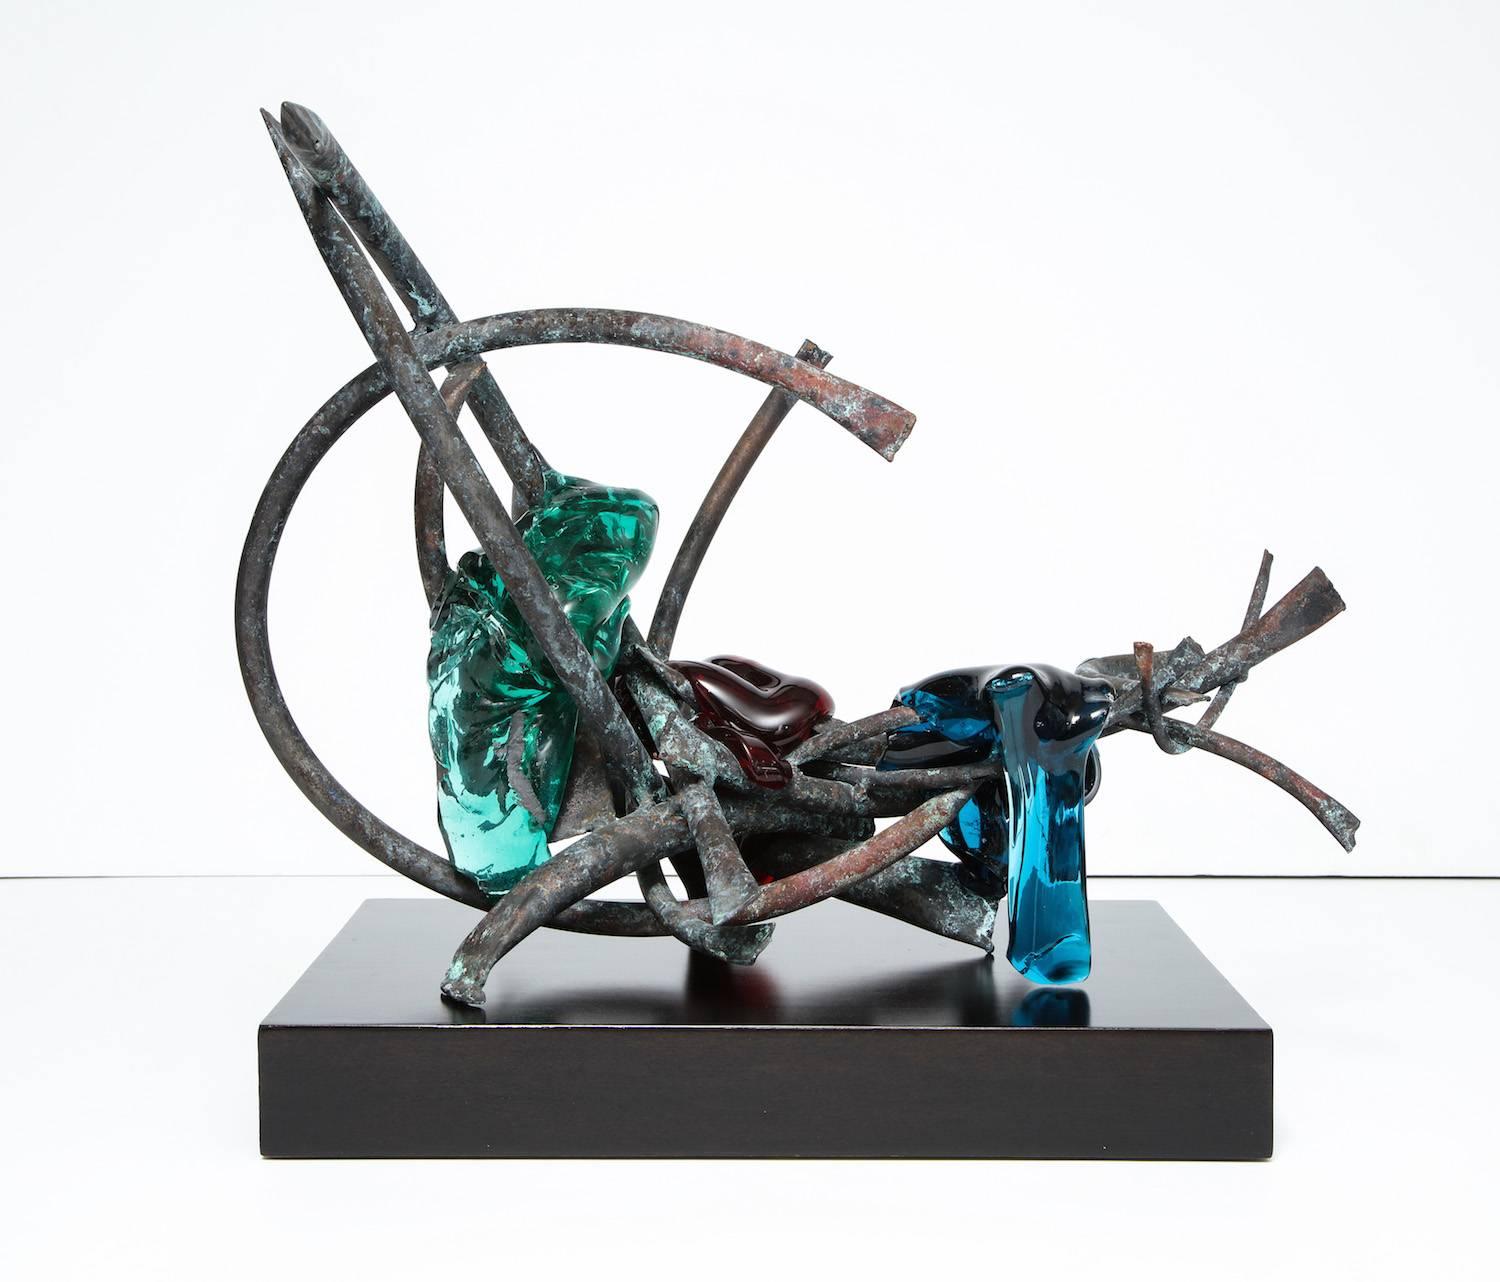 Sculpture by Claire Falkenstein. Copper tubing, molten Murano glass in red, green and turquoise. Dimensions given do not include pedestal.